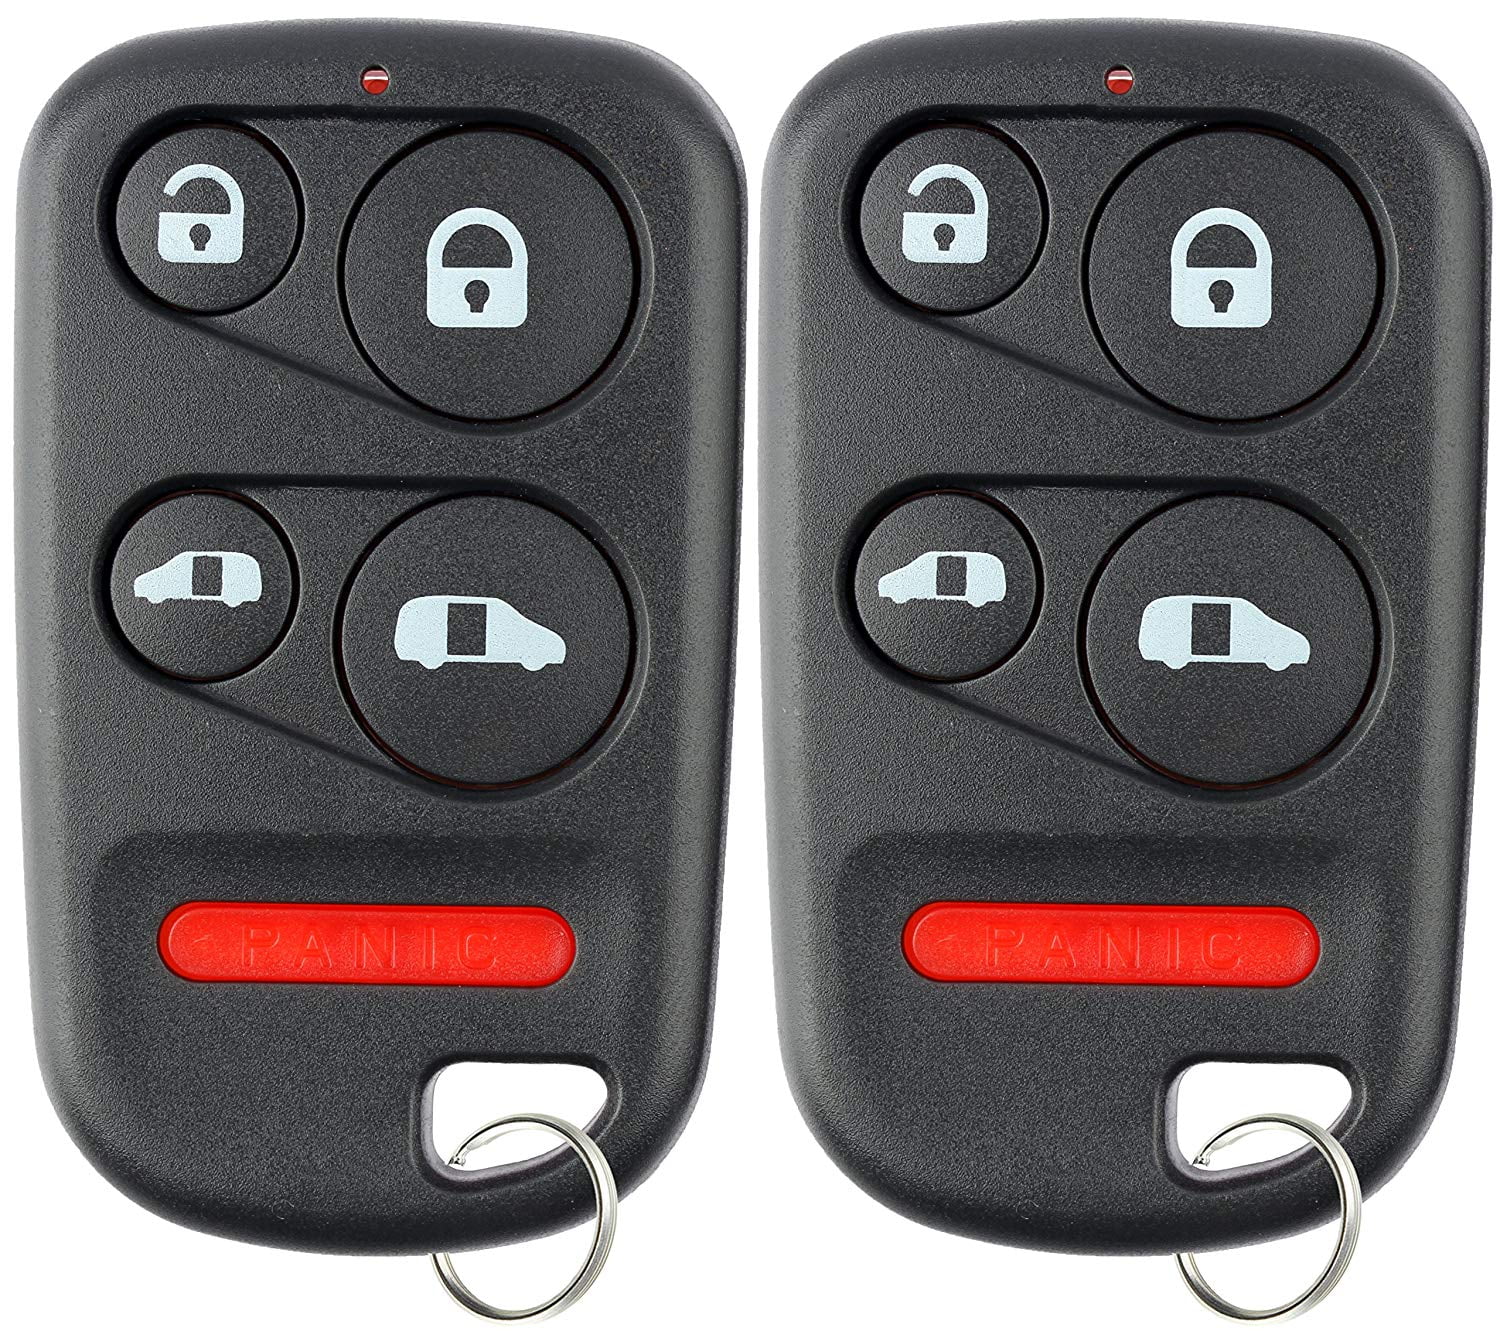 Compatible with Honda Odyssey 2005 2006 2007 2008 2009 Remote Key Fob Shell Pad